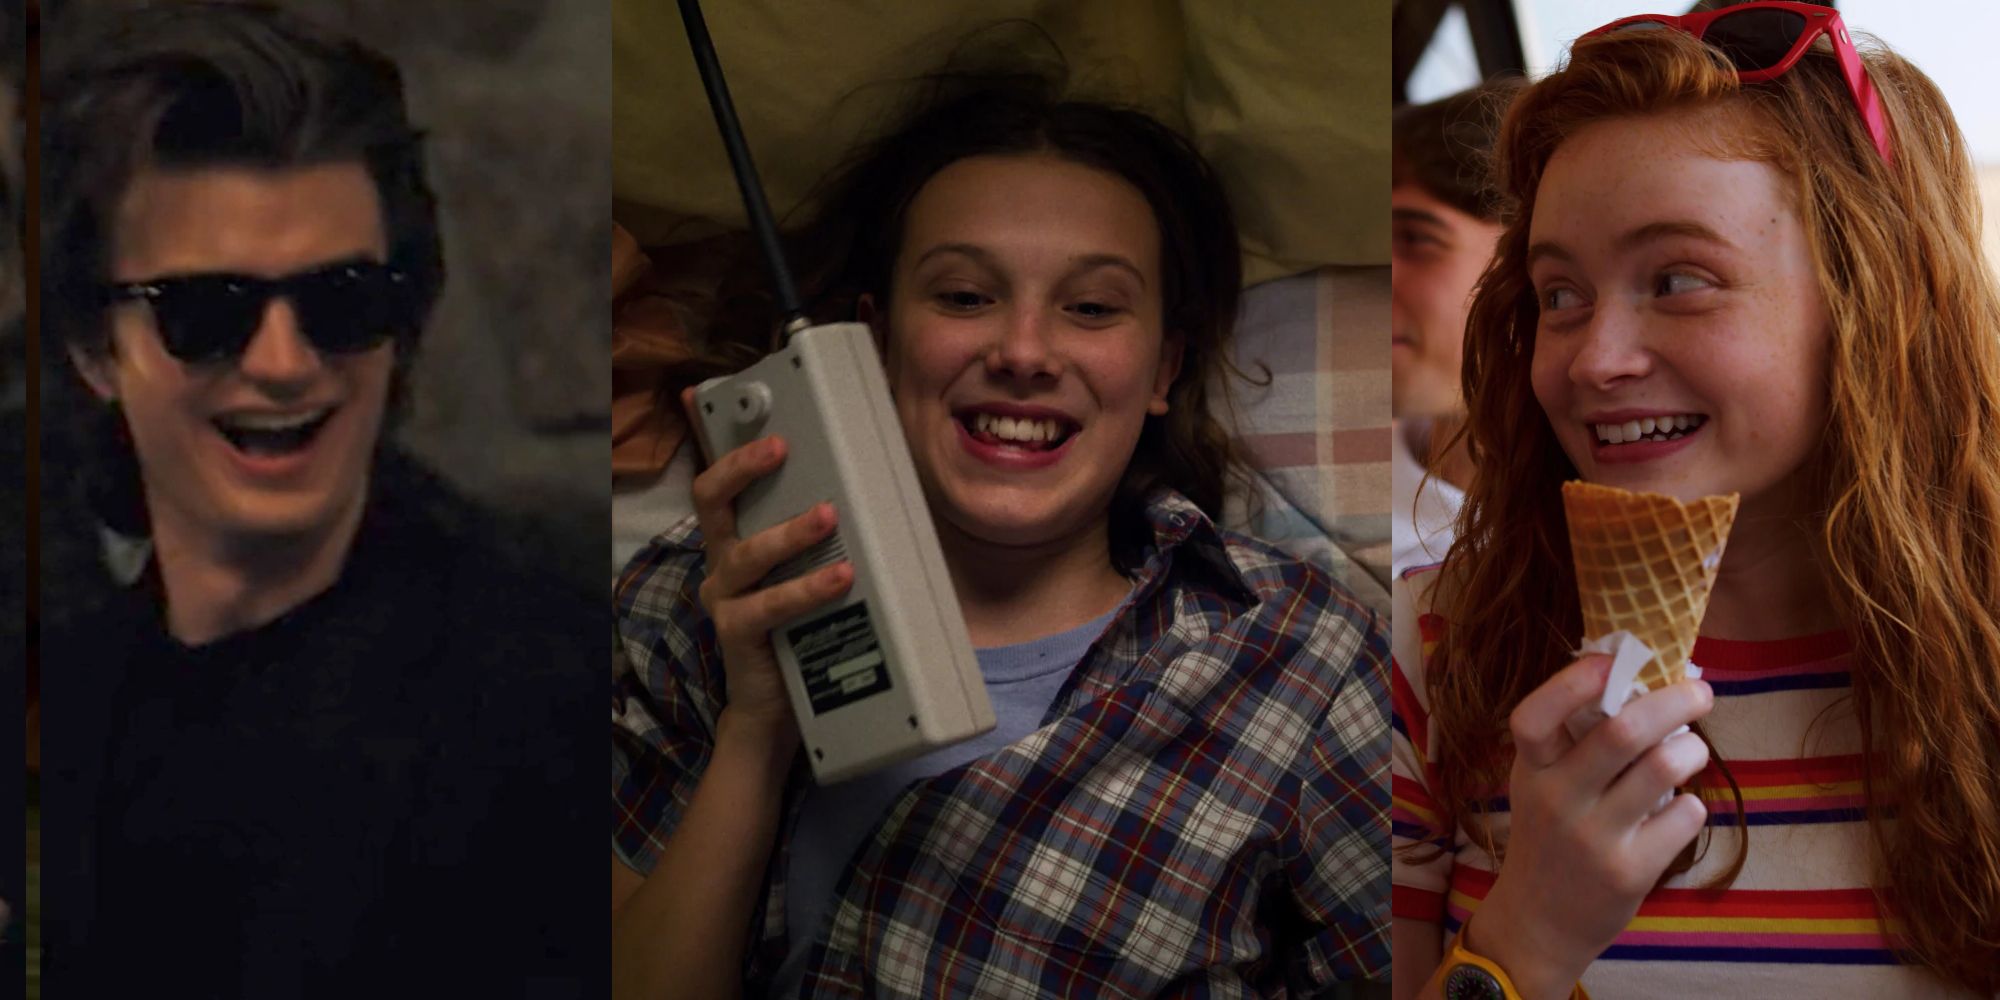 Steve dancing at a party; Eleven smiling while talking on a walkie-talkie; Max smiling with an ice cream cone